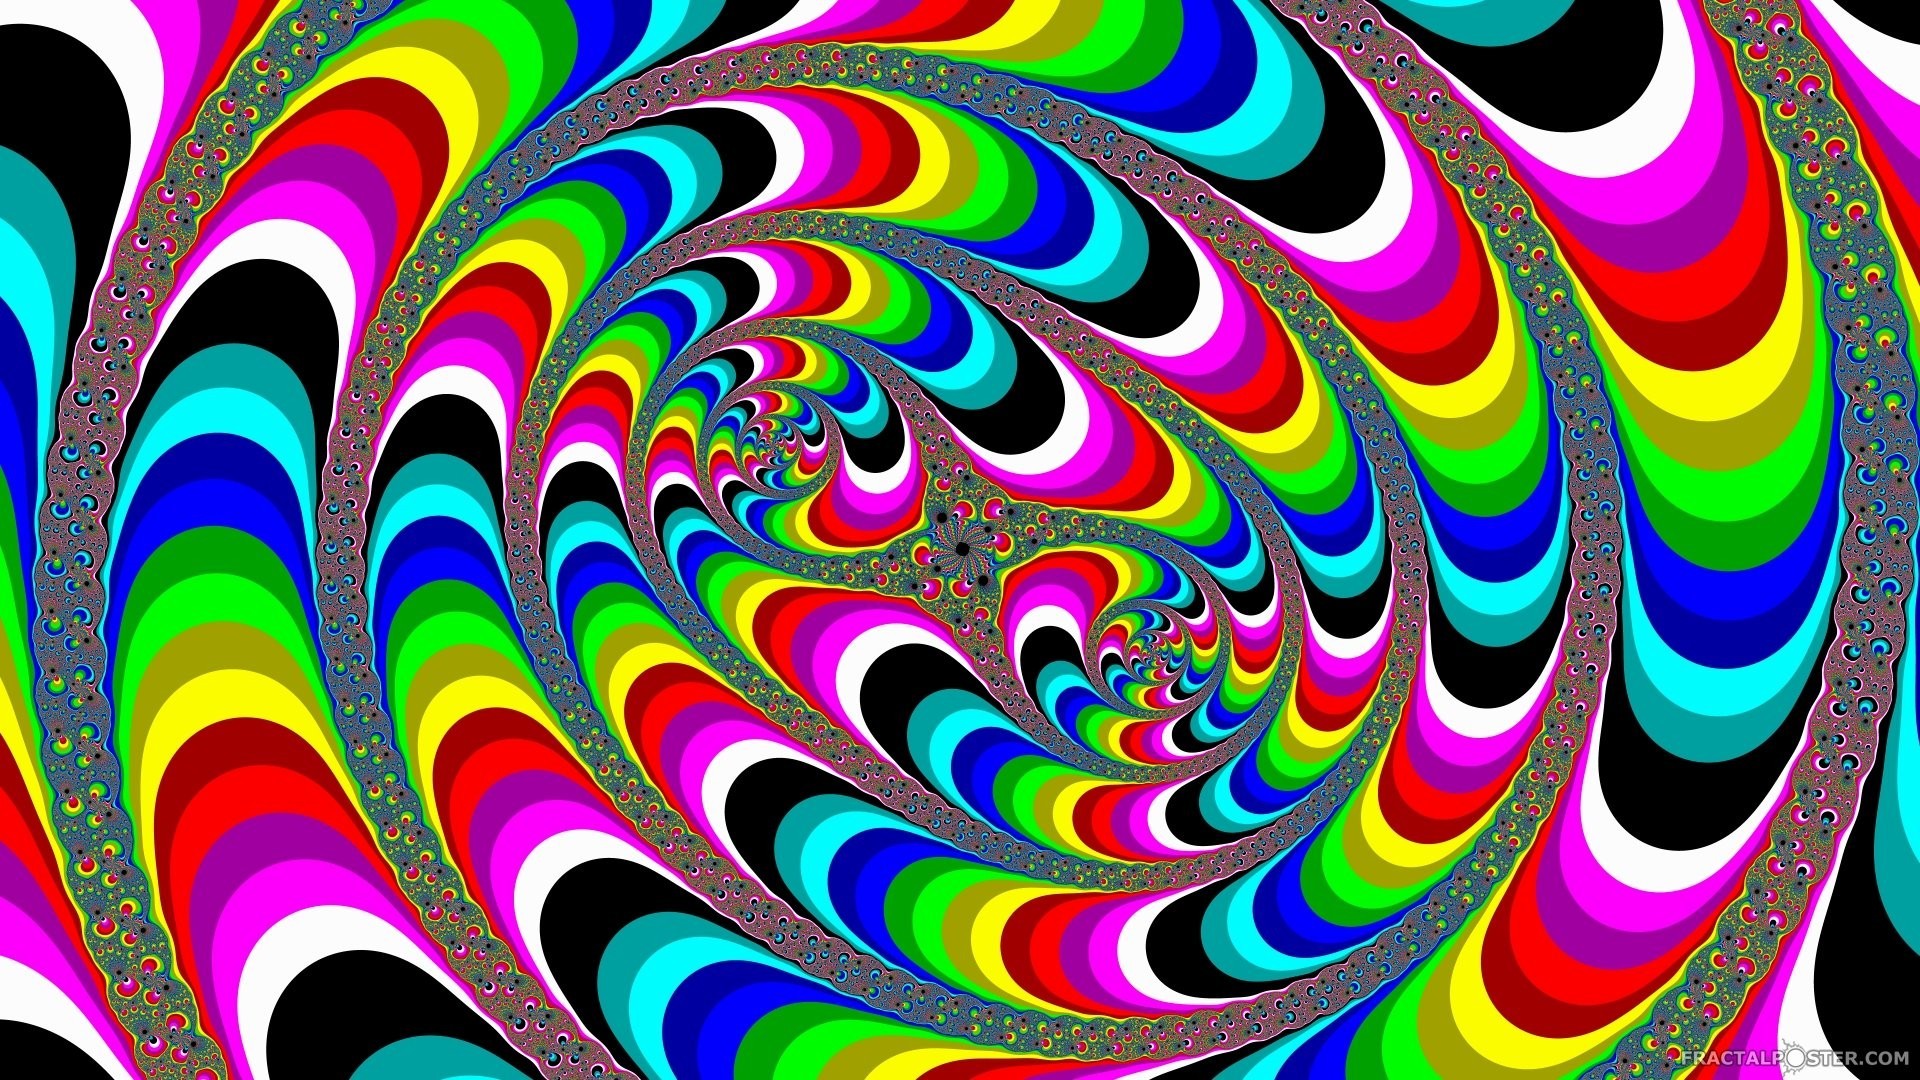 Trippy Colorful Wallpaper HD With Resolution 1920X1080